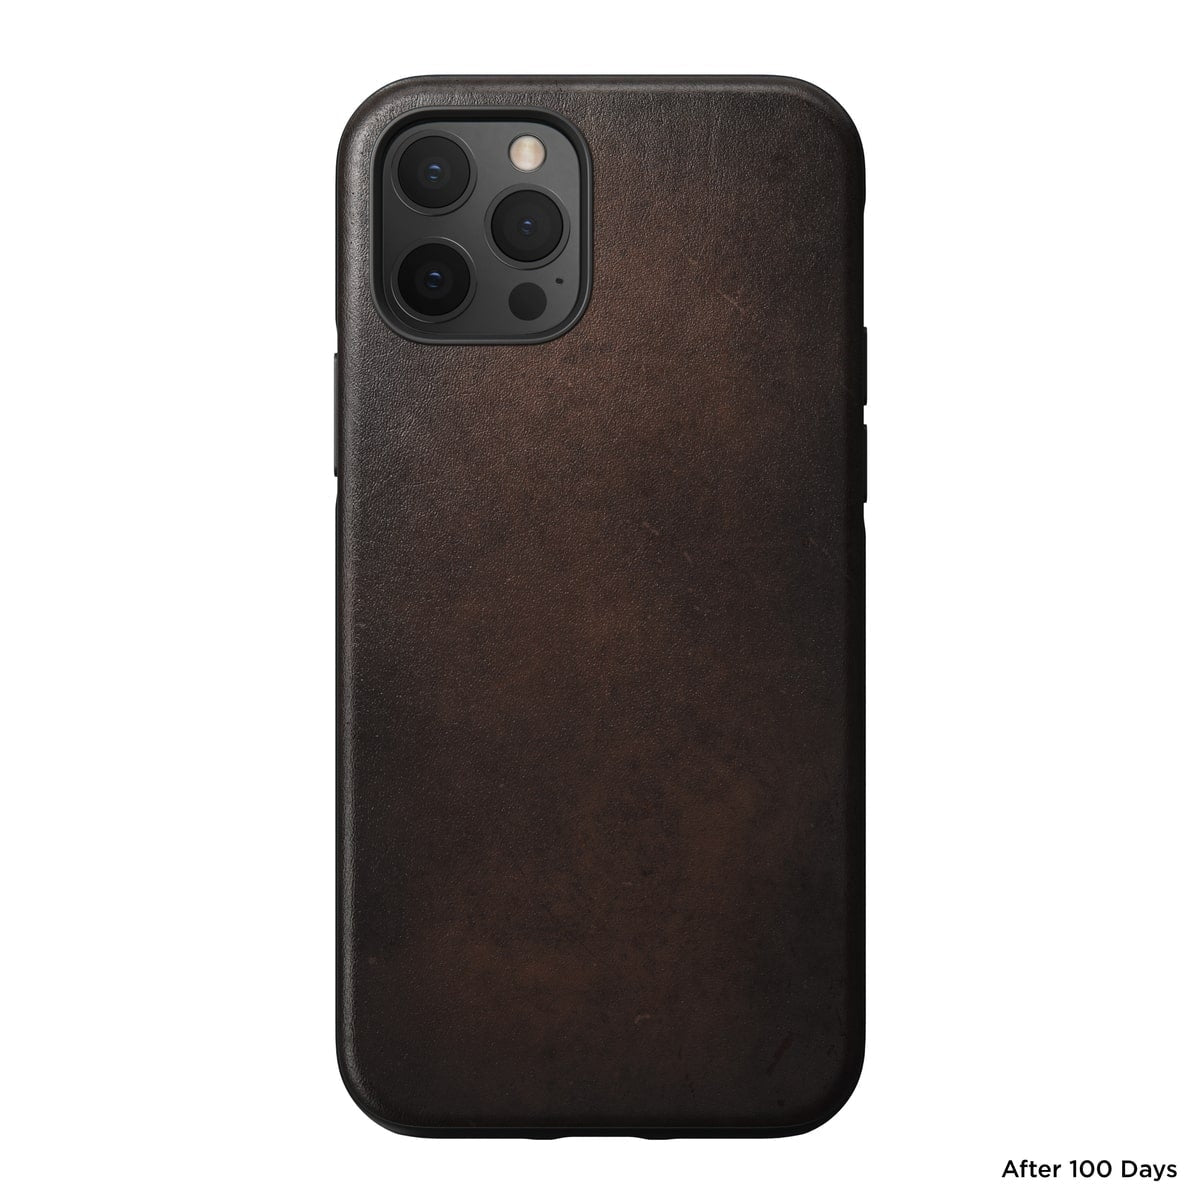 Husa Piele Naturala Nomad Rugged - iPhone 12 & Pro - NM21gN0R00 - 856500019451 - 16